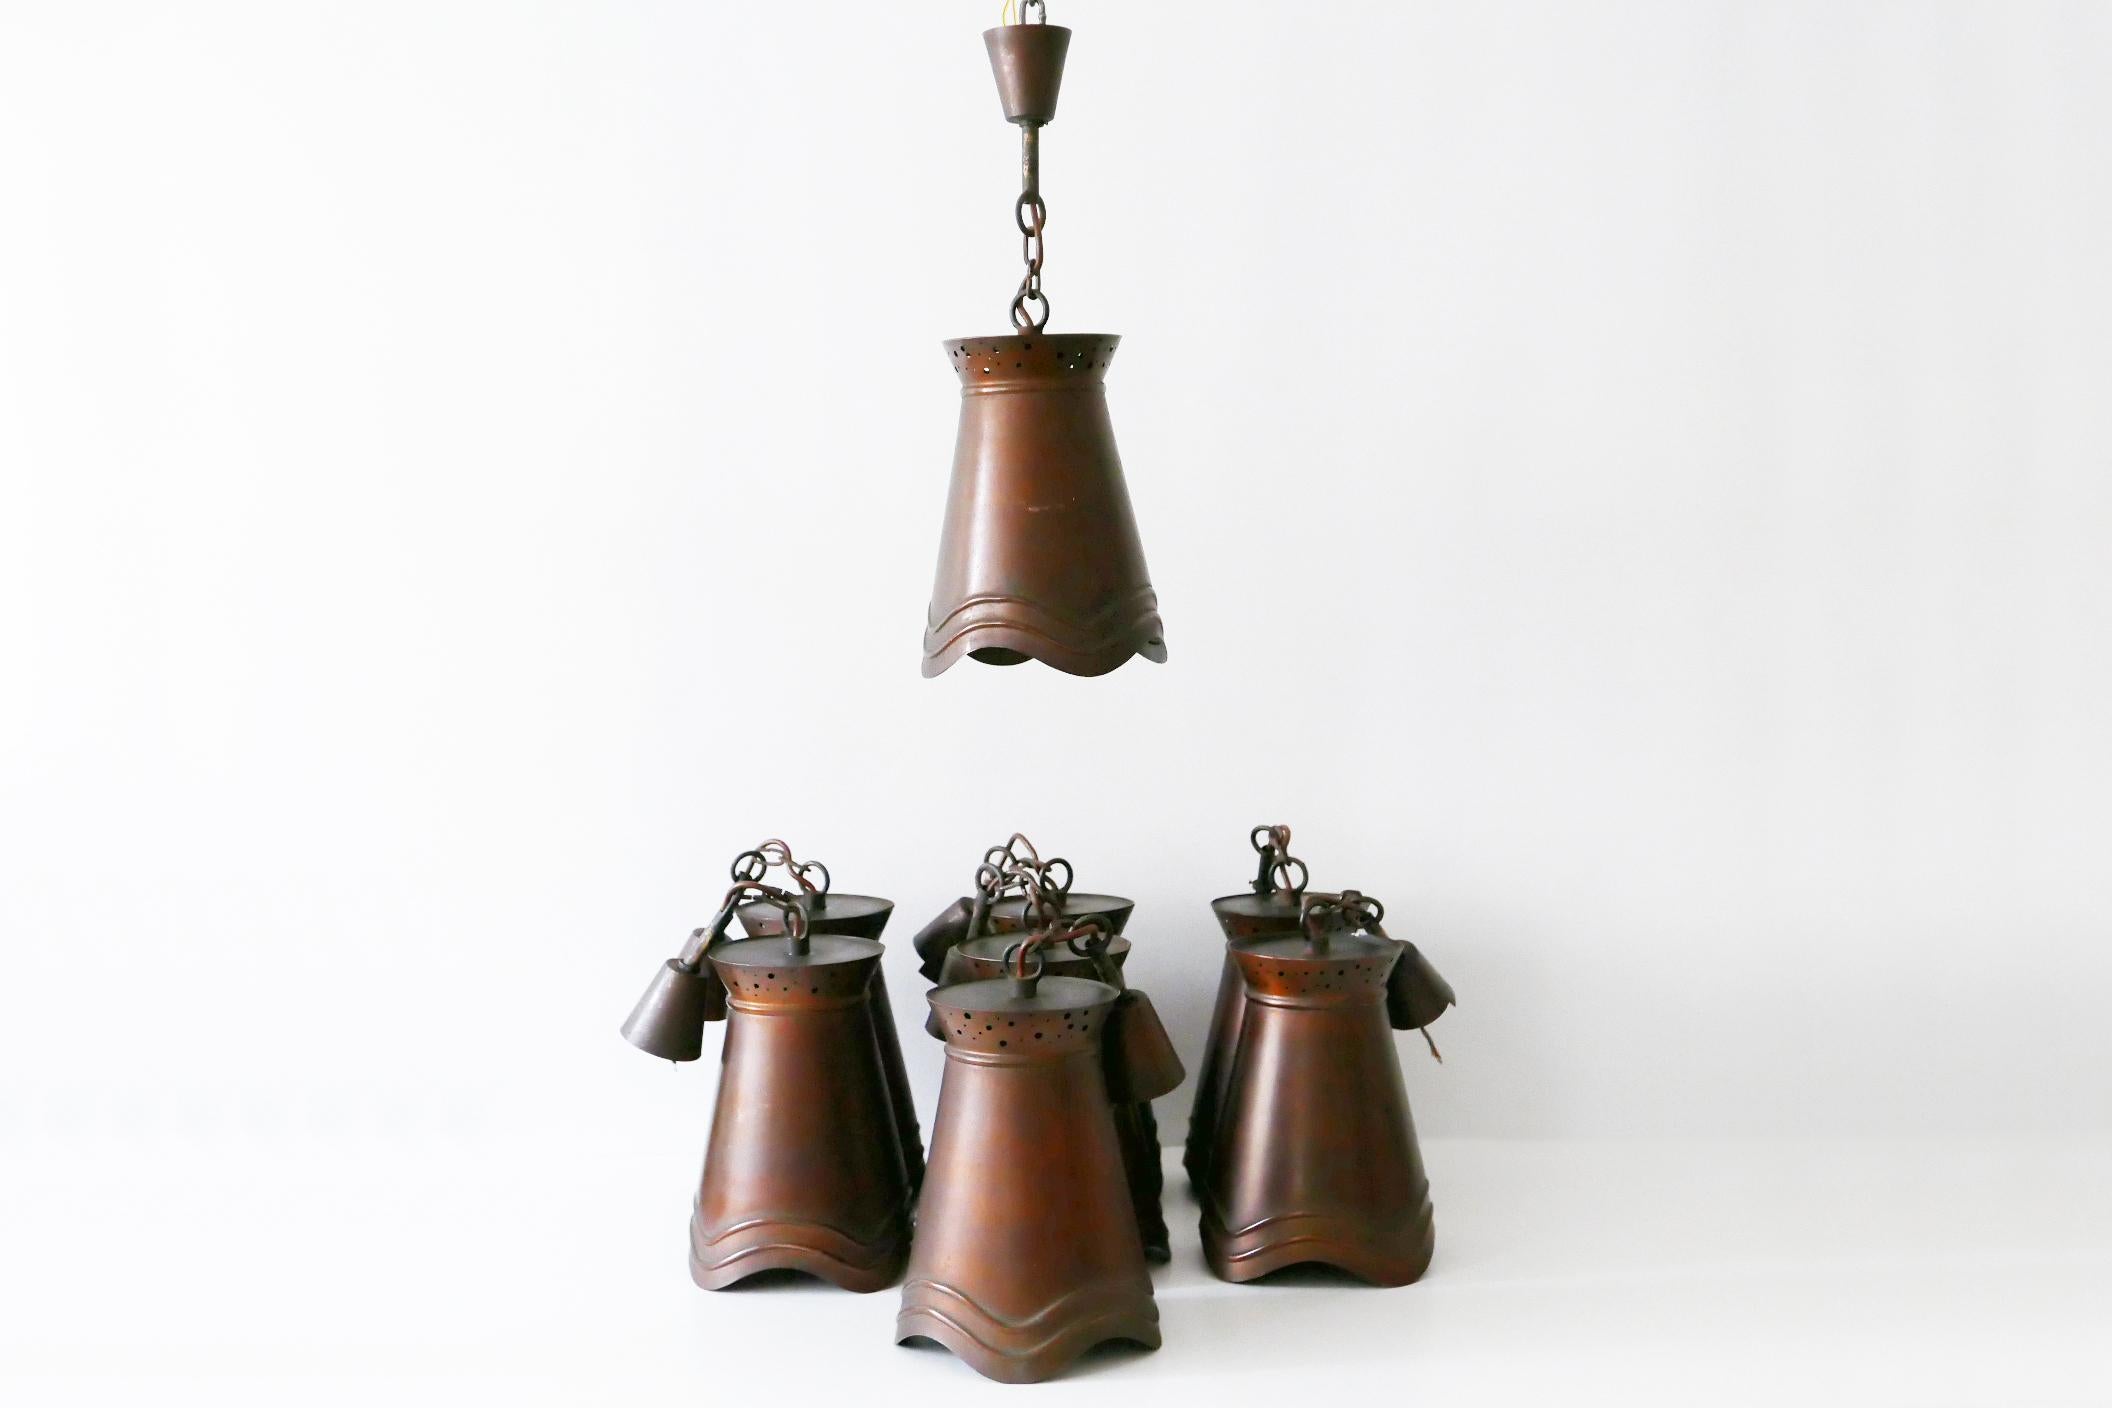 Mid-Century Modern Copper Pendant Lamps or Hanging Lights, Germany, 1950s For Sale 8